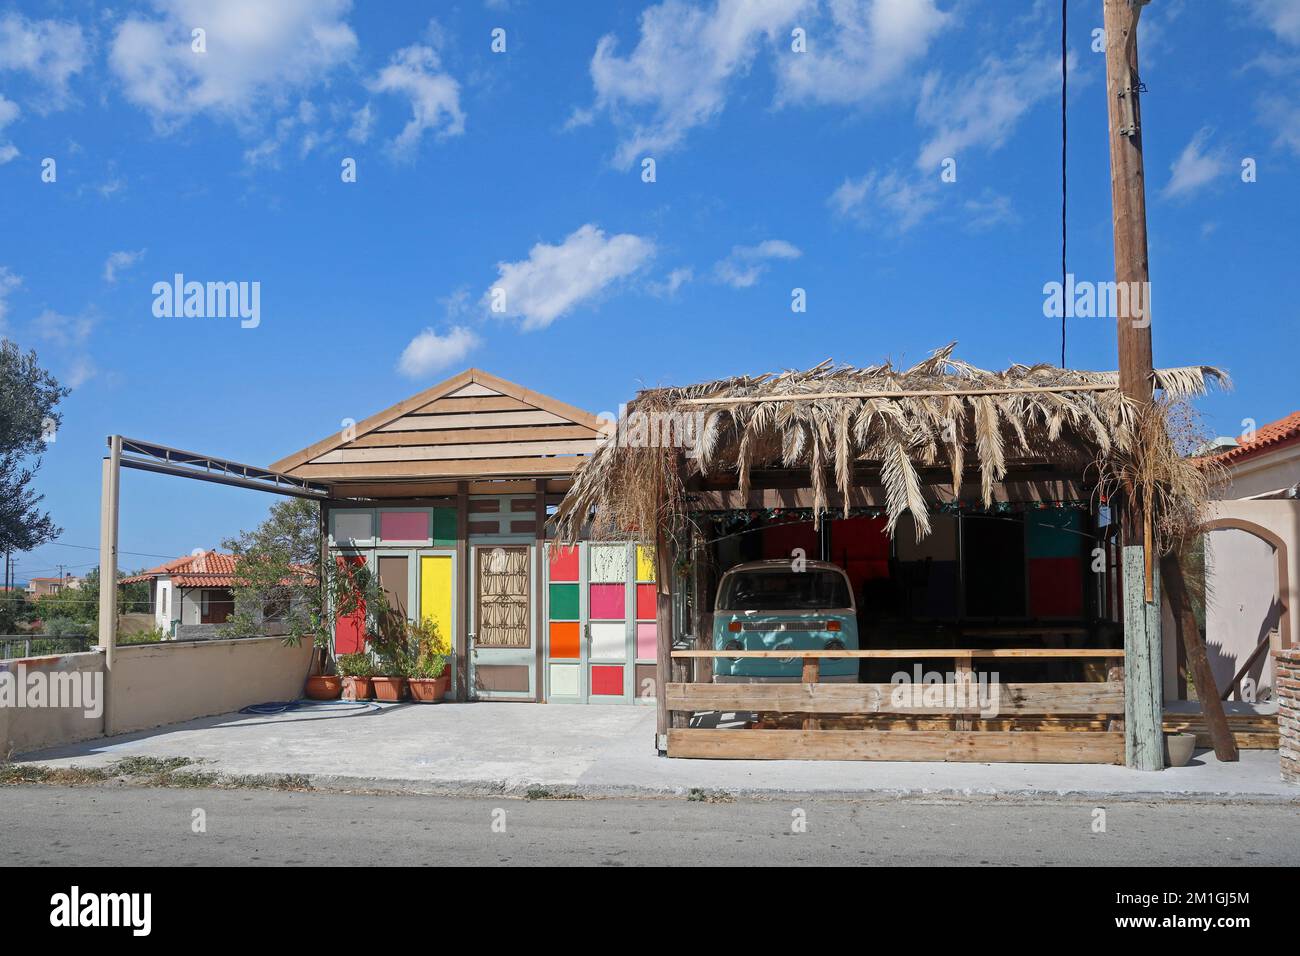 Small colourful shack style cafe (closed at end of season) and VW camper van parked inside, Lesbos. Taken September / October 2022. Stock Photo